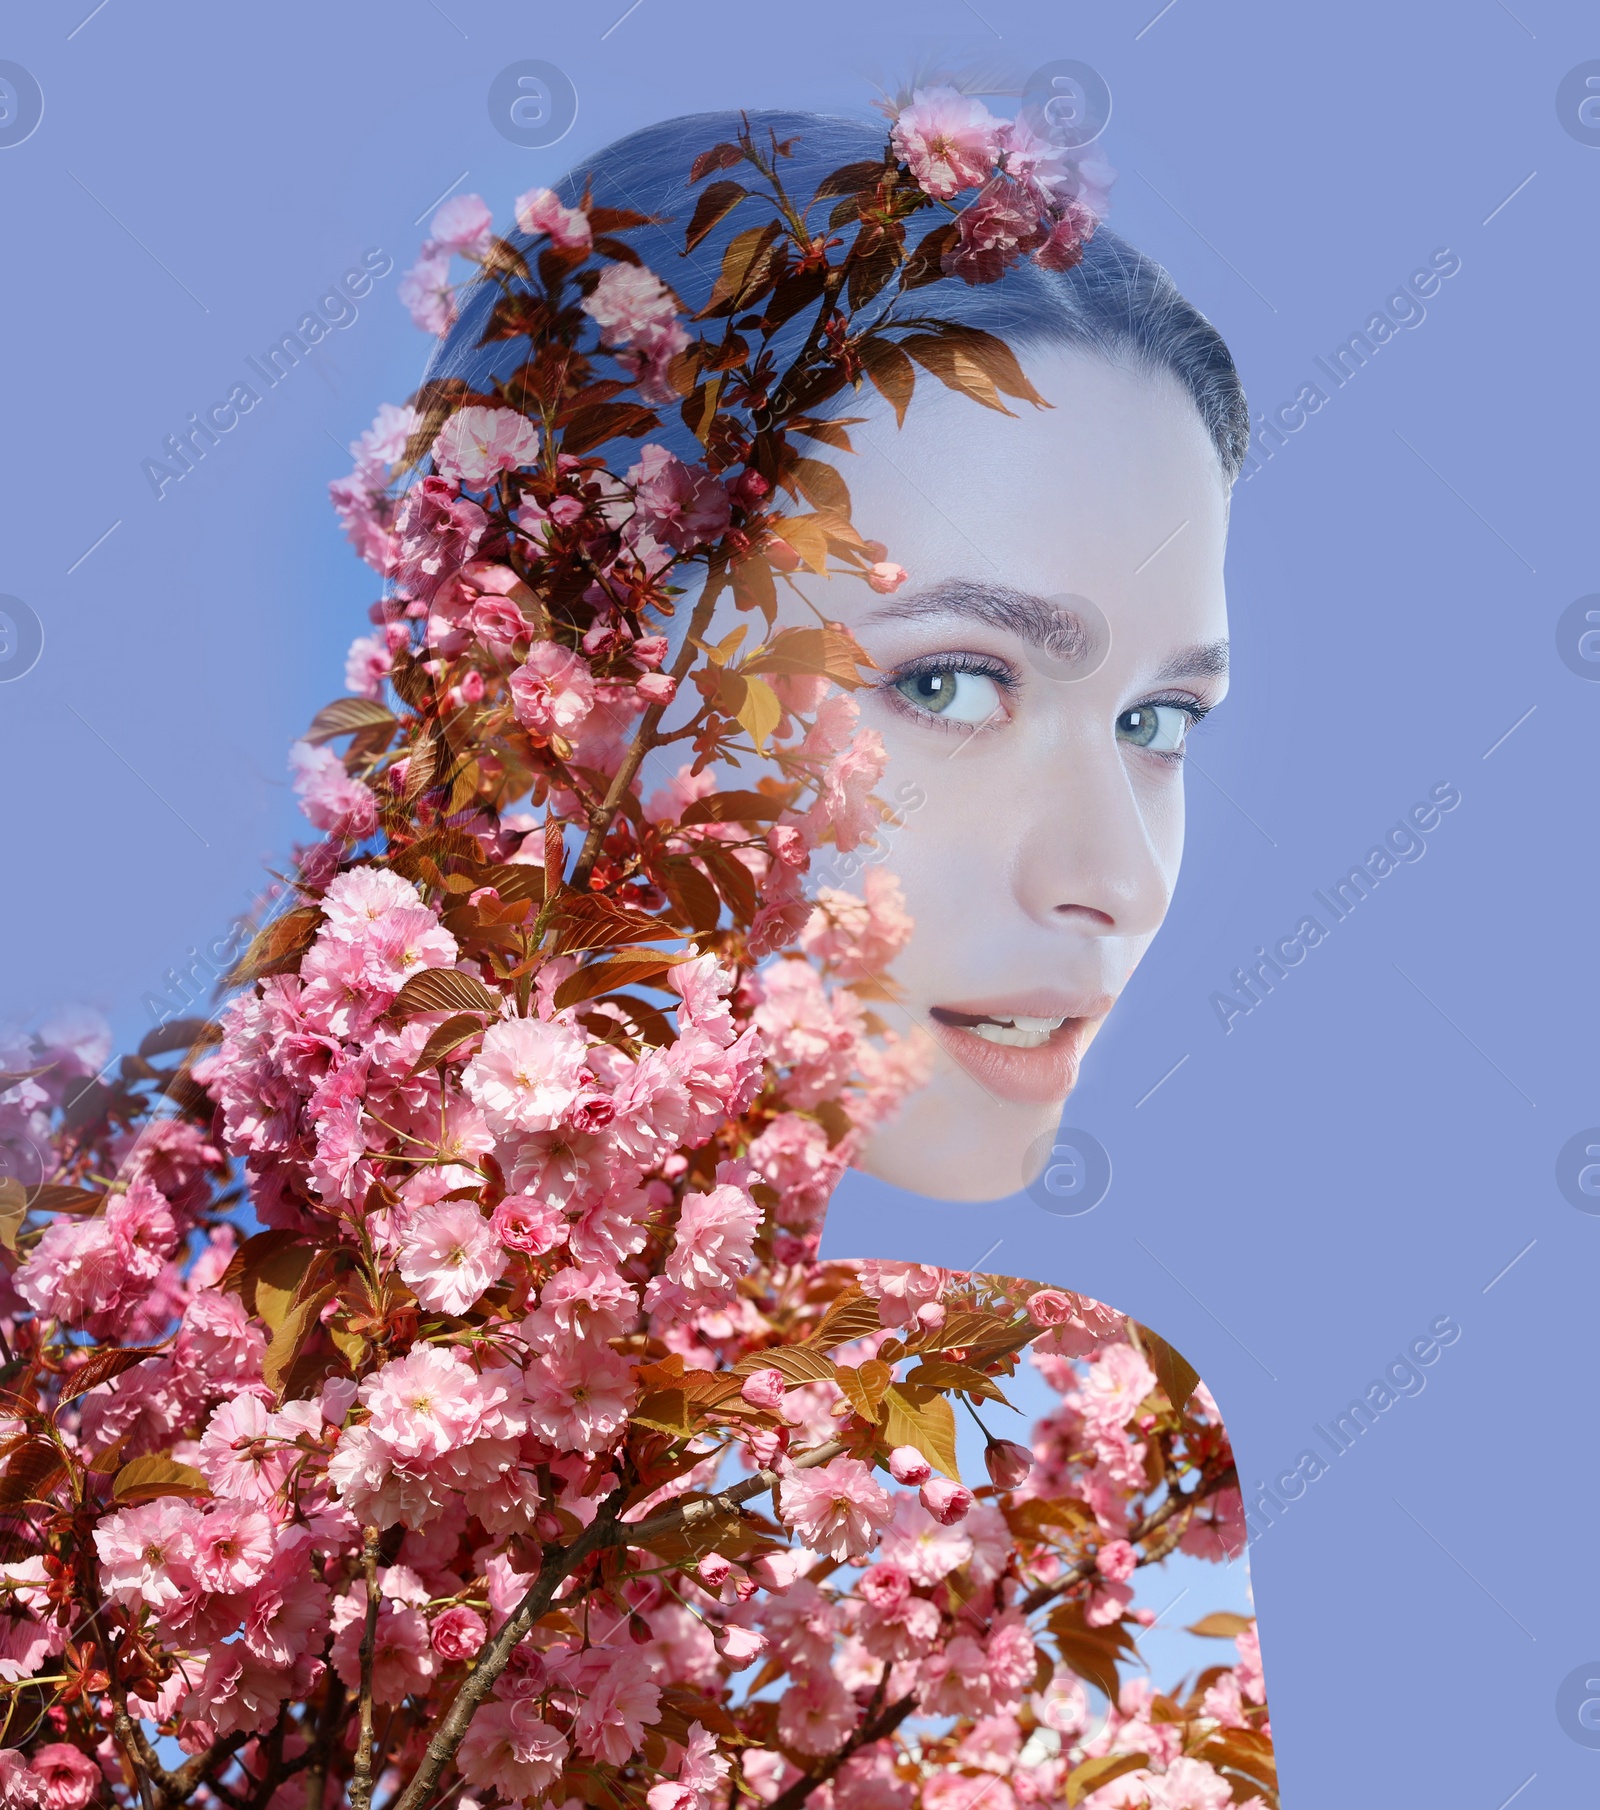 Image of Double exposure of beautiful woman and blooming flowers on blue background